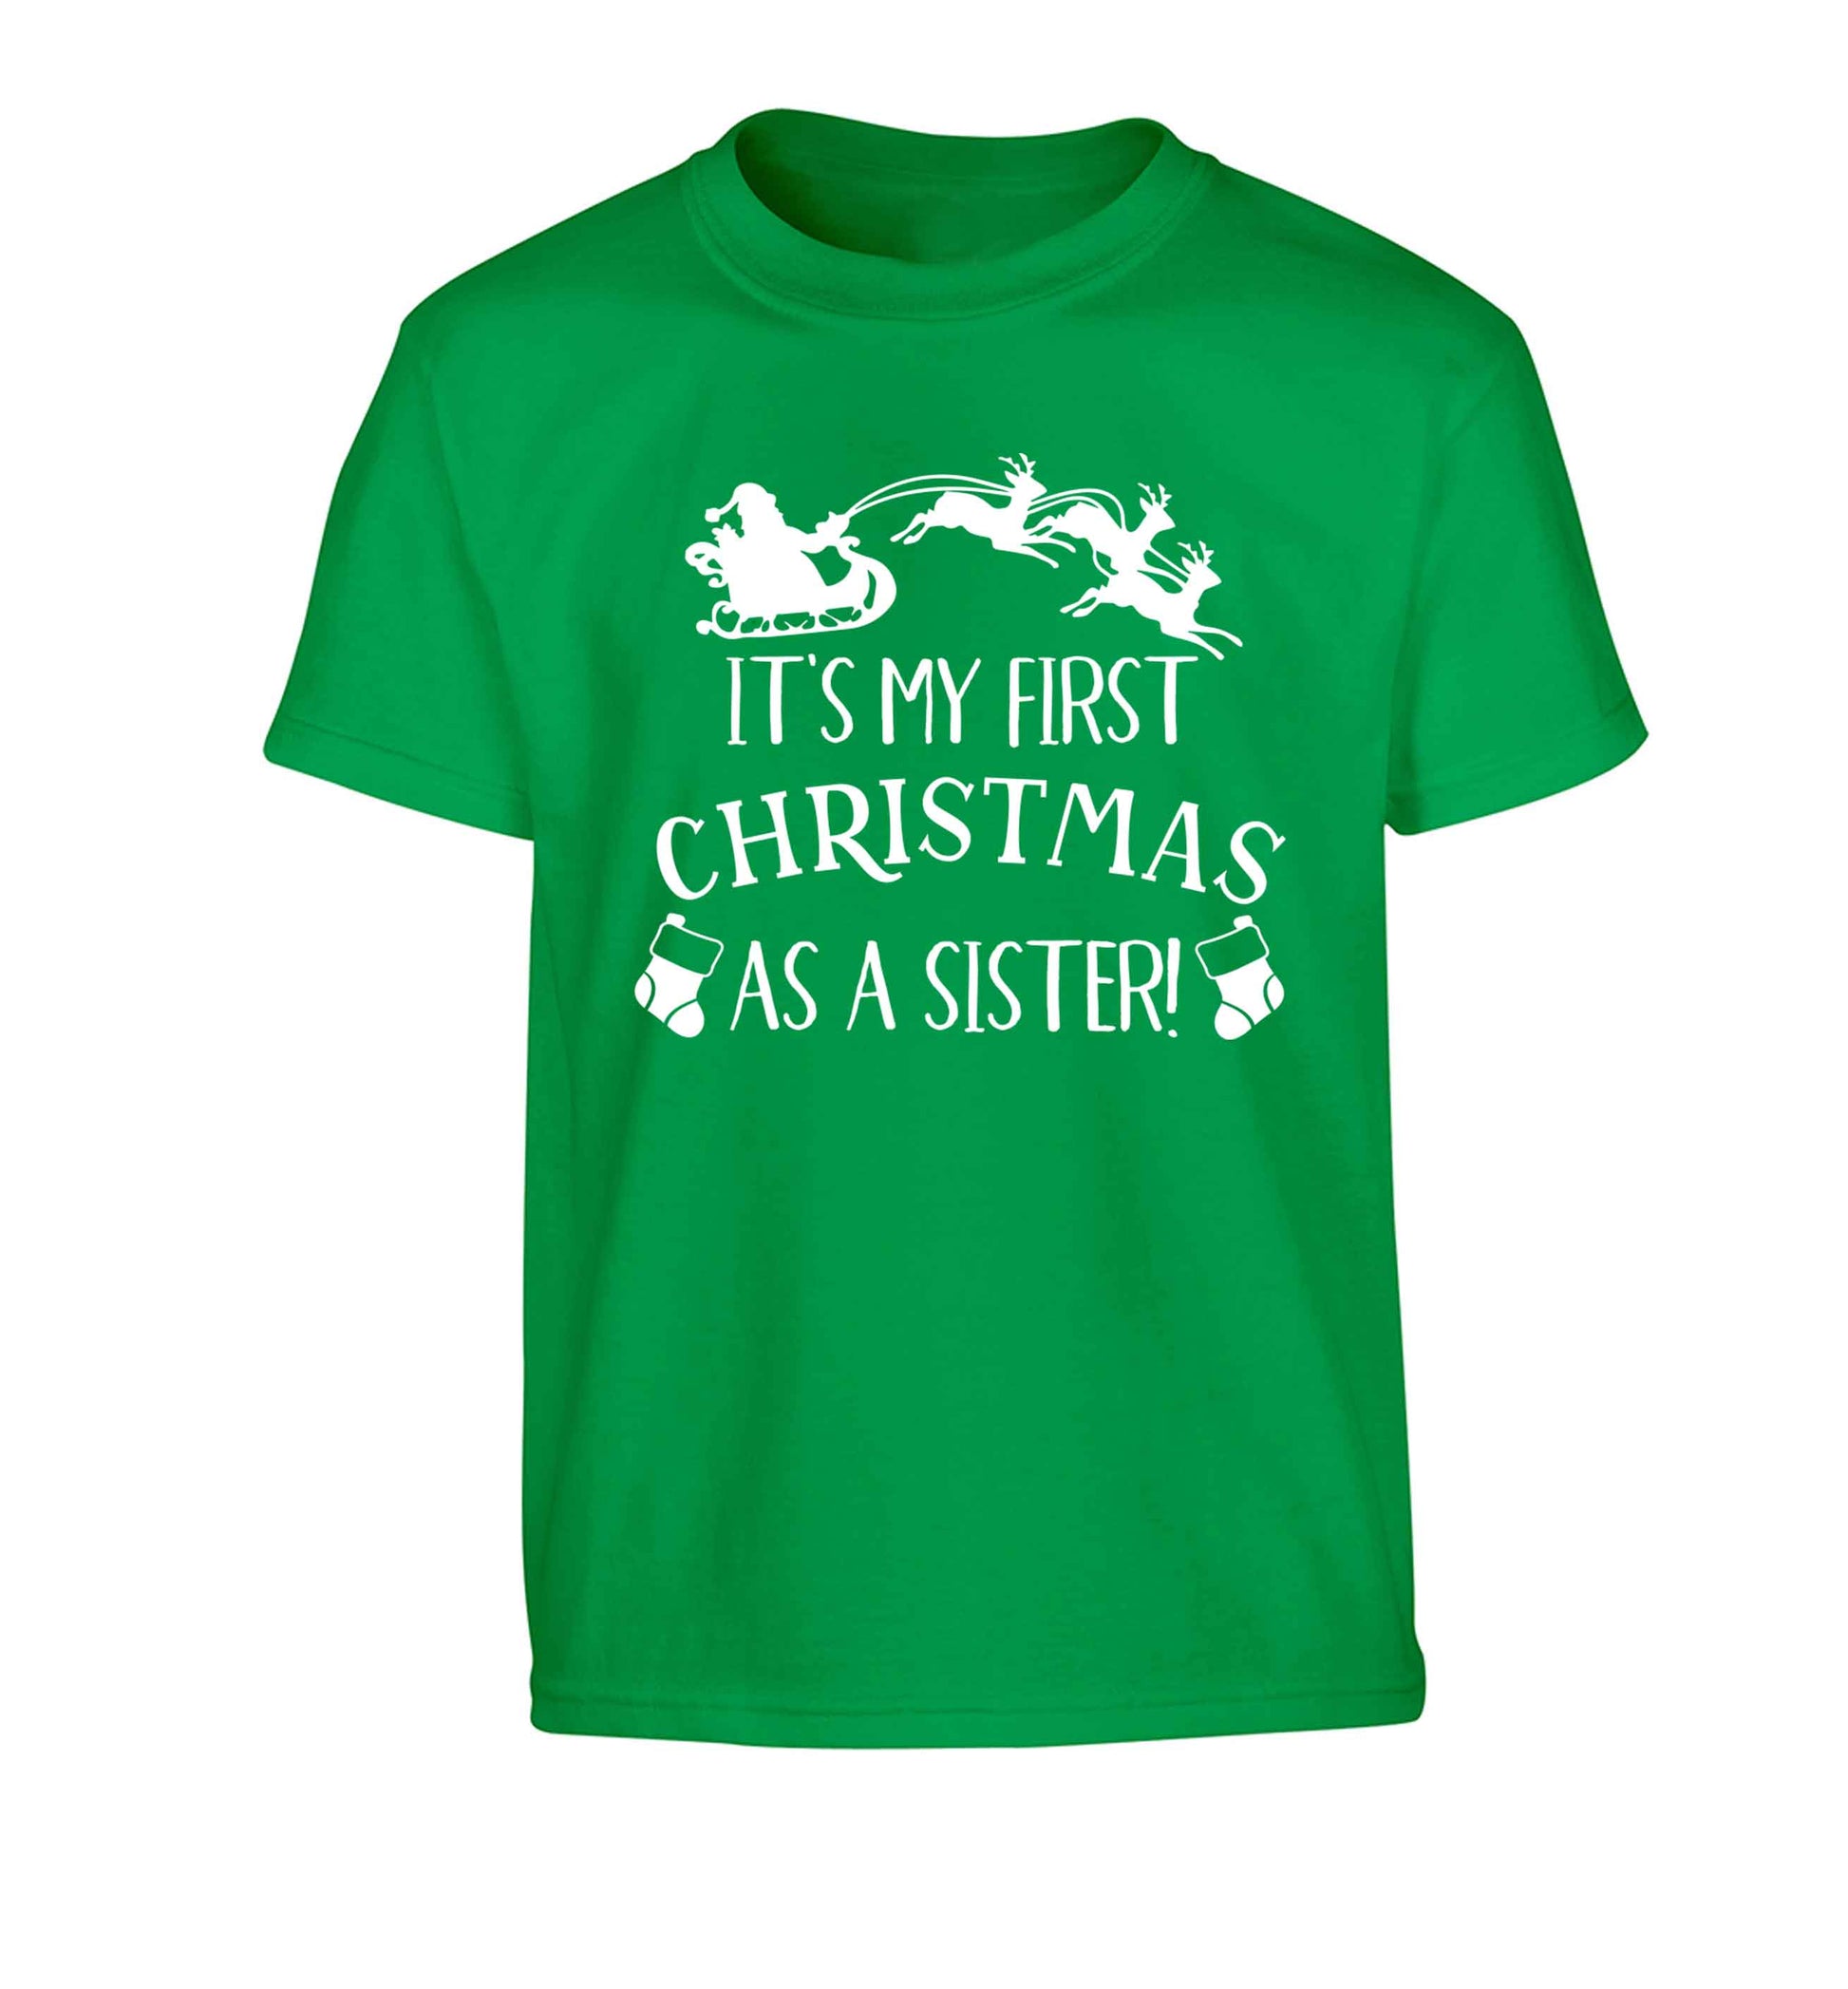 It's my first Christmas as a sister! Children's green Tshirt 12-13 Years